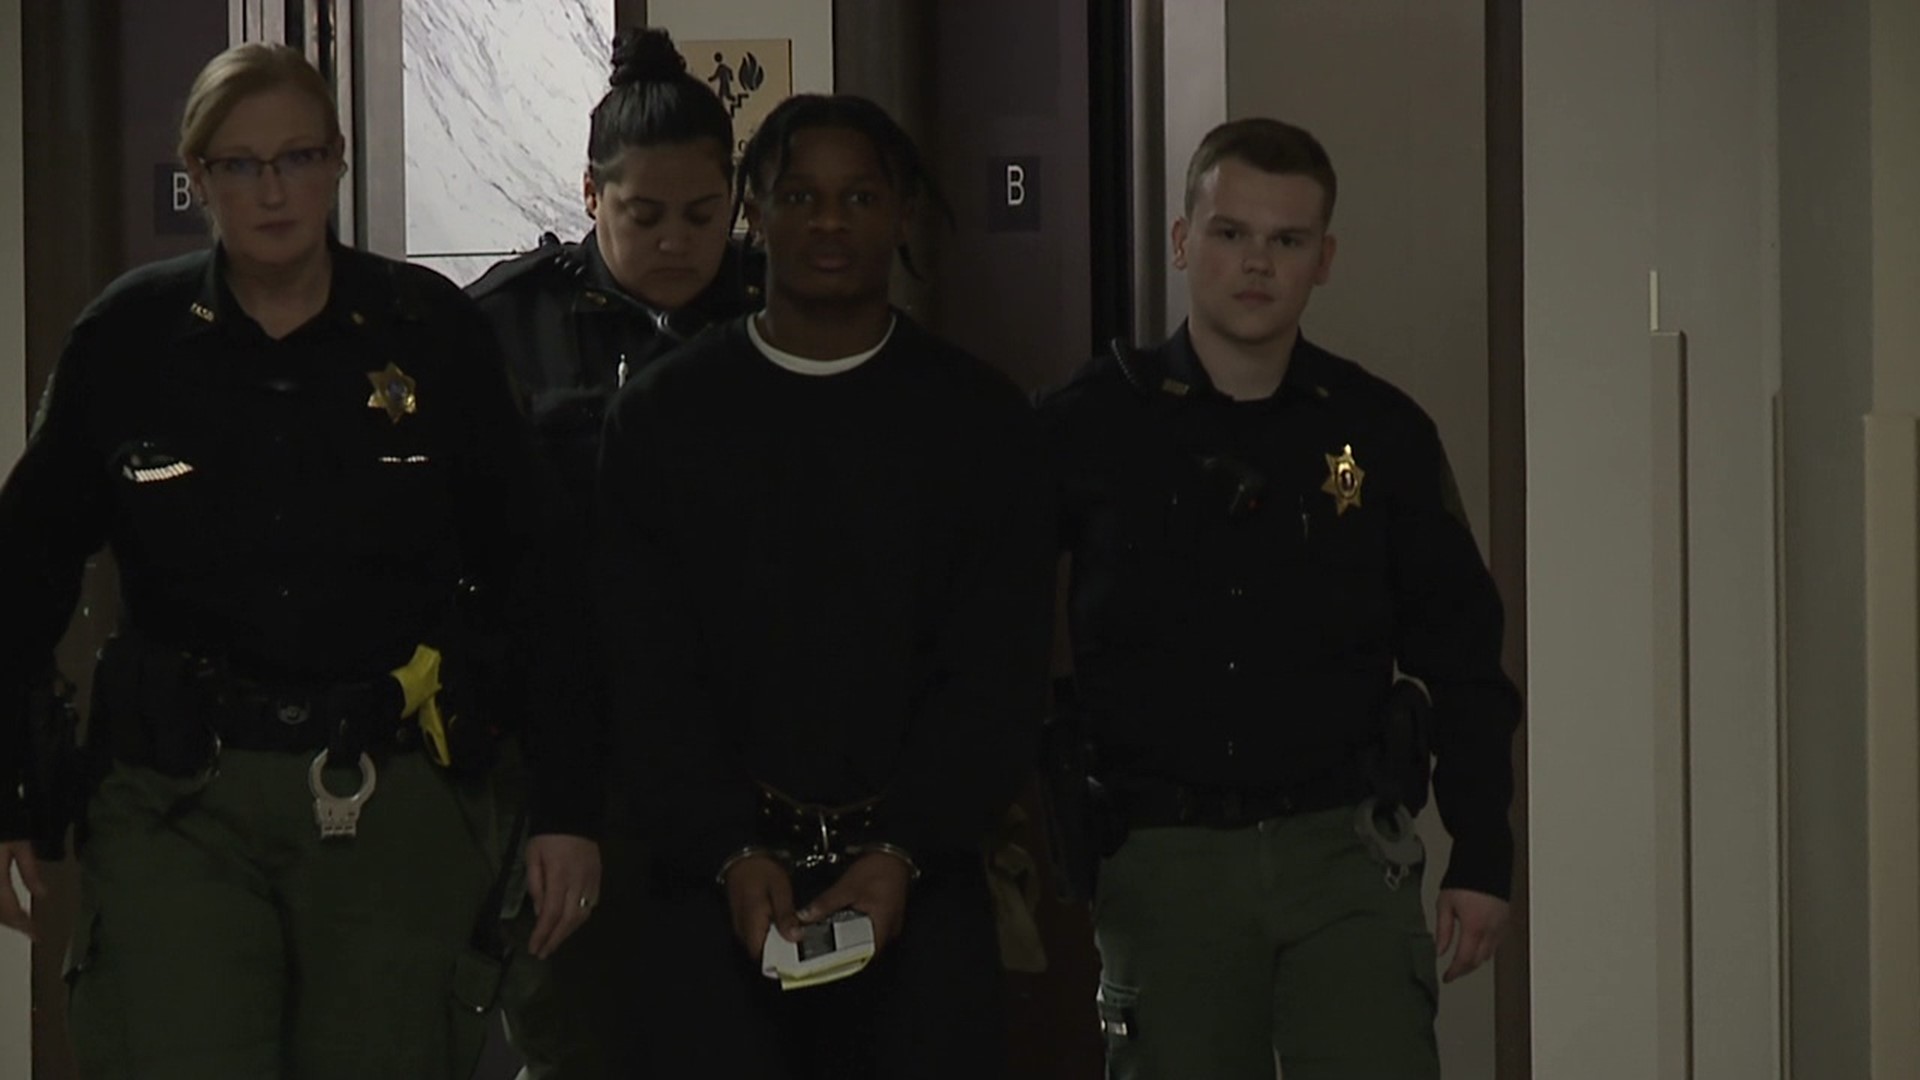 A Luzerne County man will spend the rest of his life behind bars for his role in a deadly shooting. The jury came back with the guilty verdict late Thursday night.